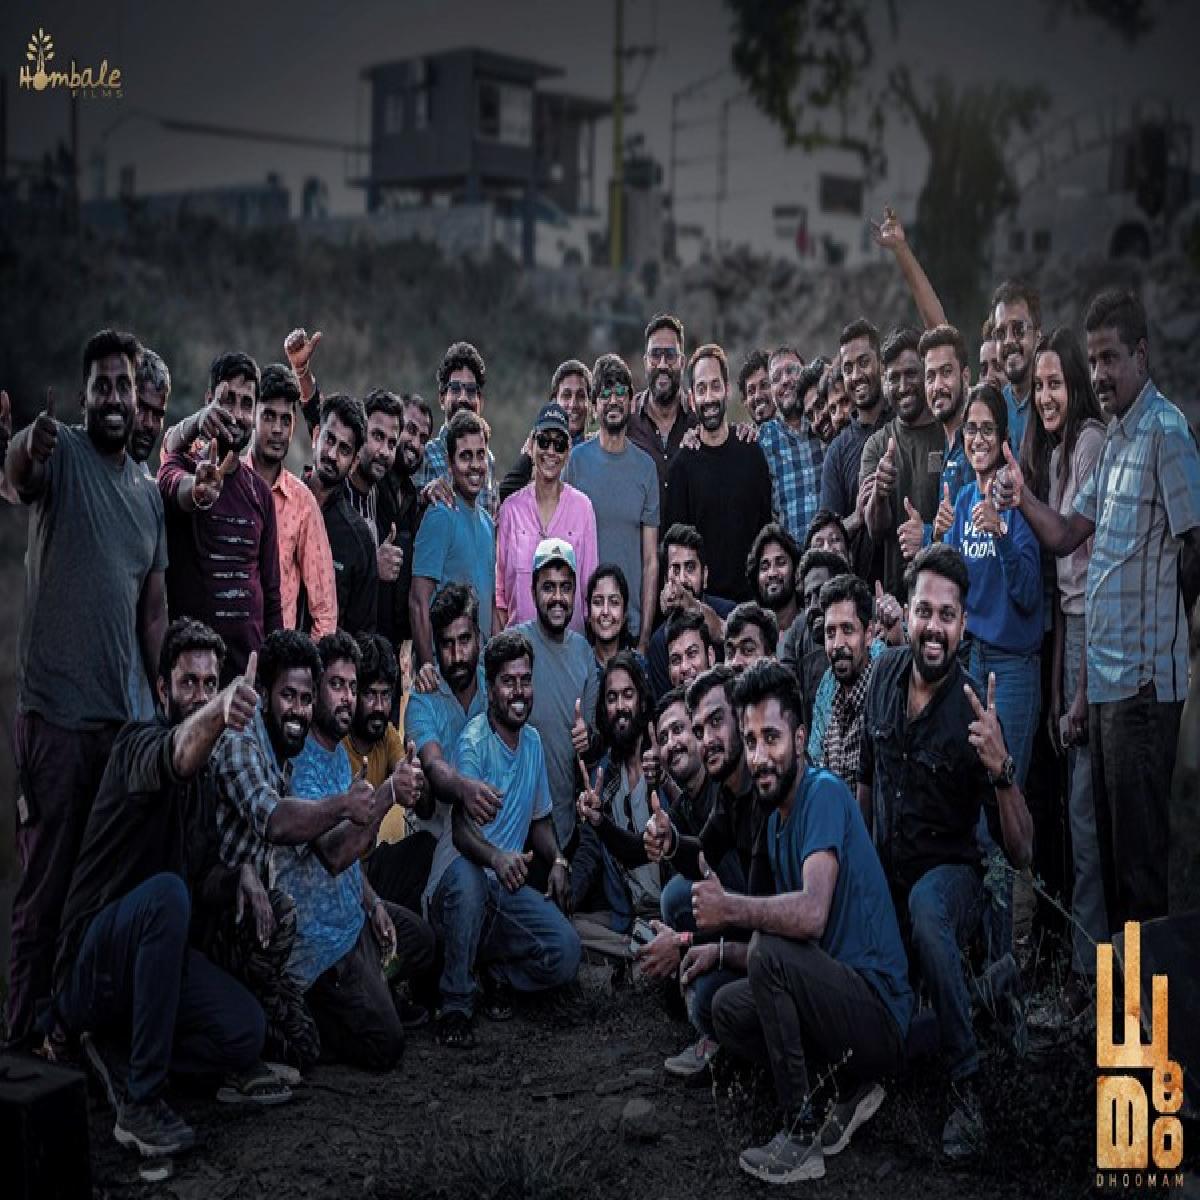 Dhoomam Is Wrapped, Confirms Hombale Films